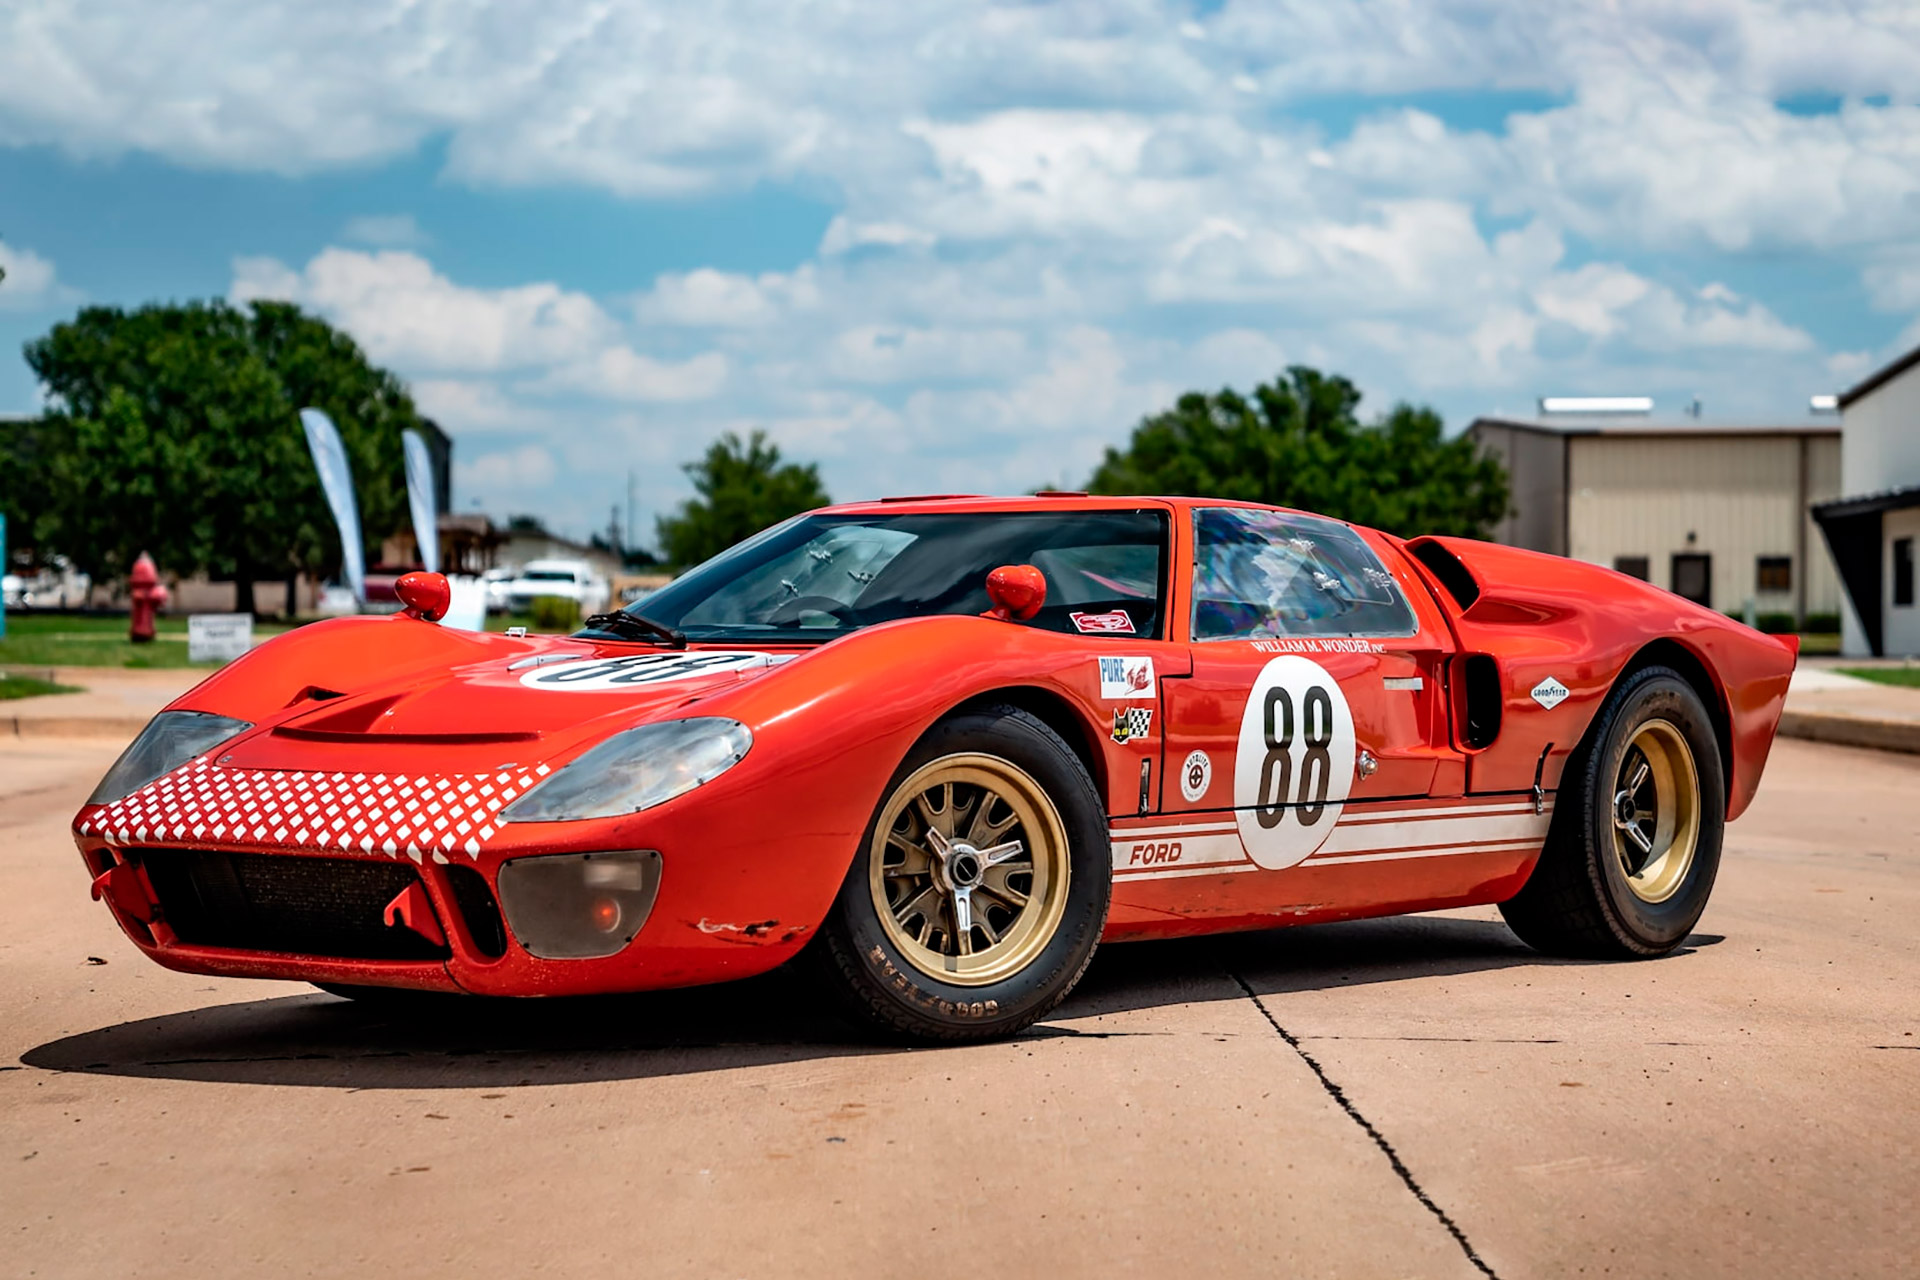 Ford GT40 #1 1966 replica - Scapes Photos by methy